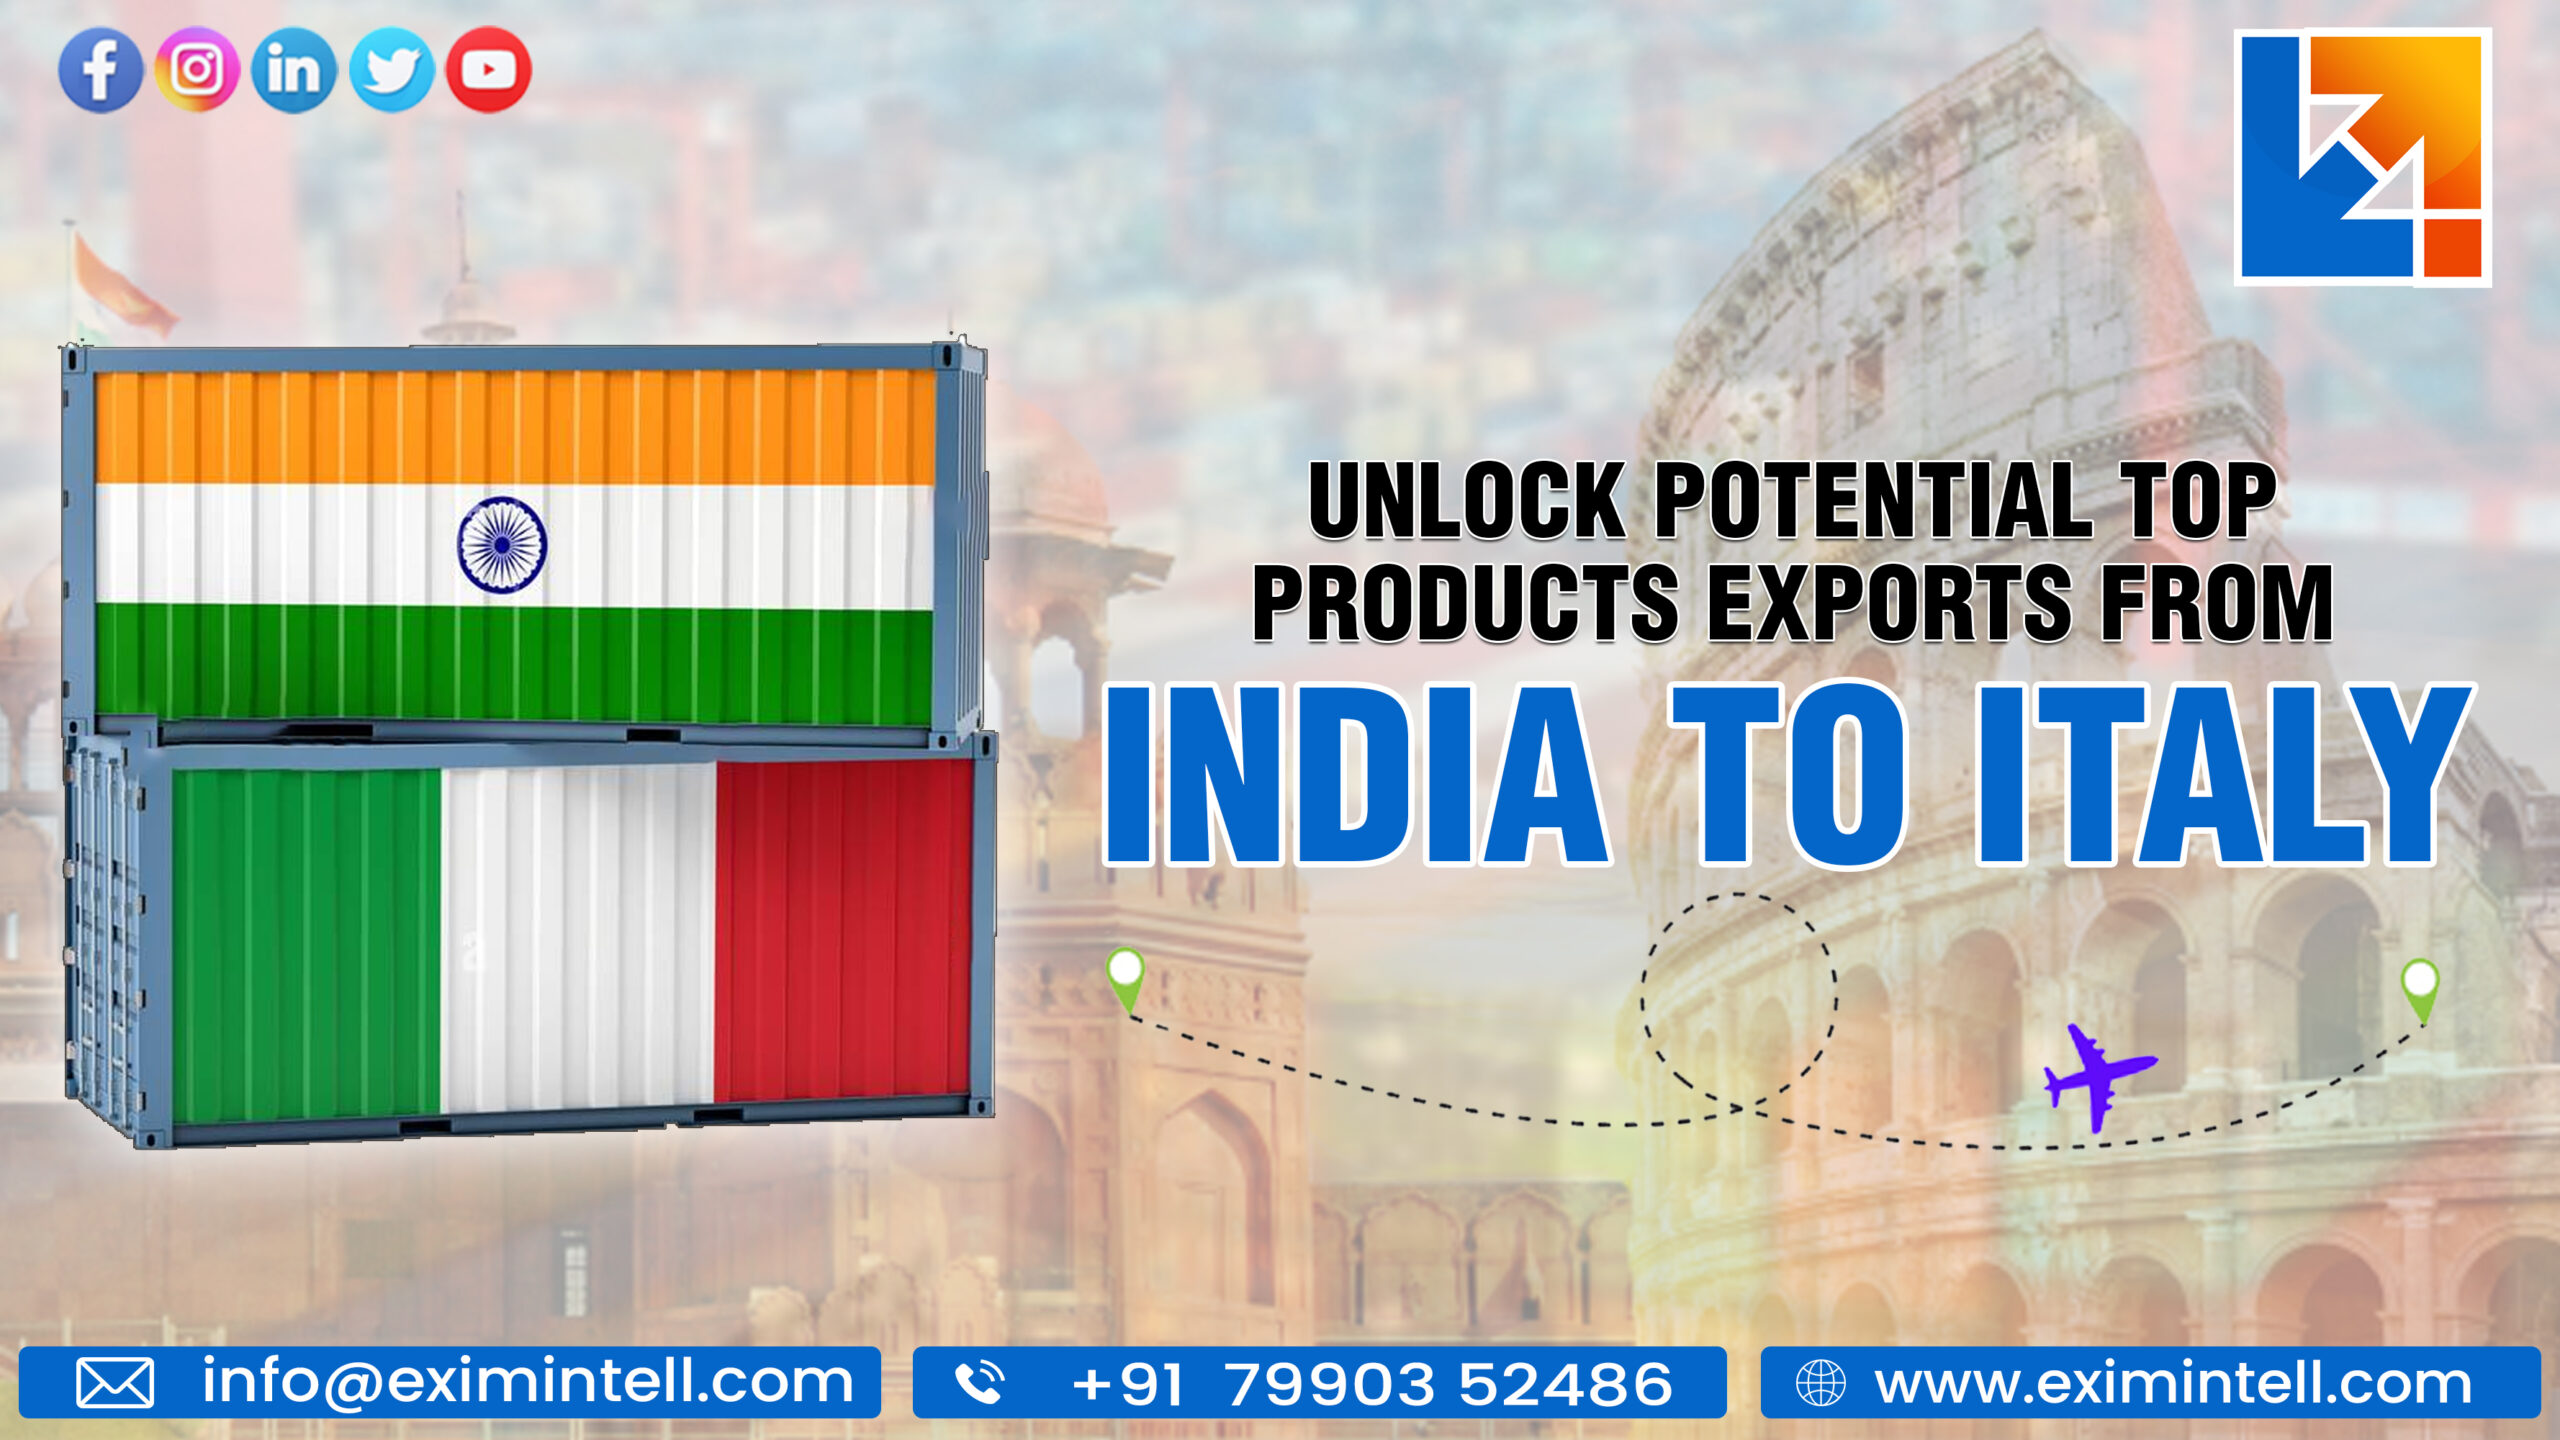 Unlock Potential: Top Products Exports from India to Italy